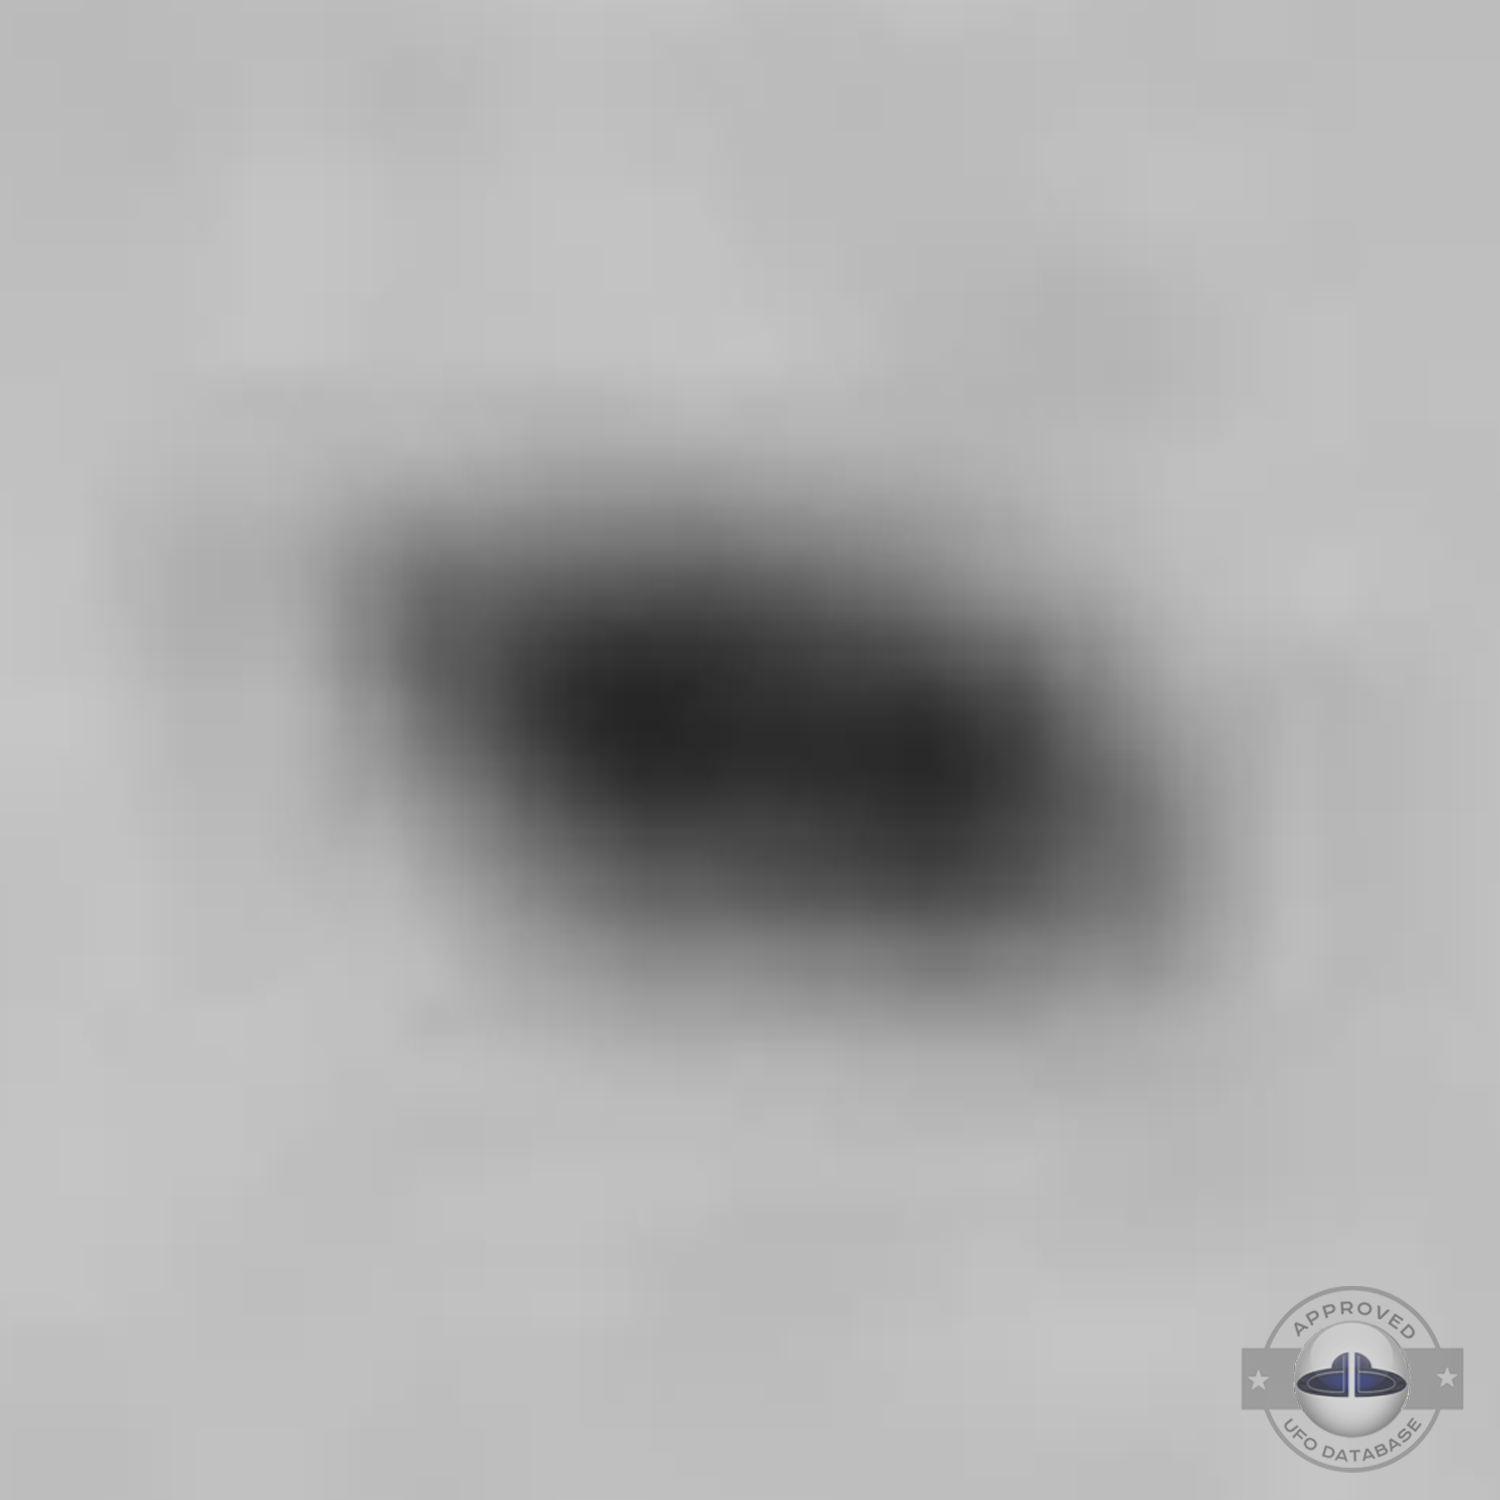 UFO picture taken over an airport somewhere in Argentina in 1967 UFO Picture #23-5